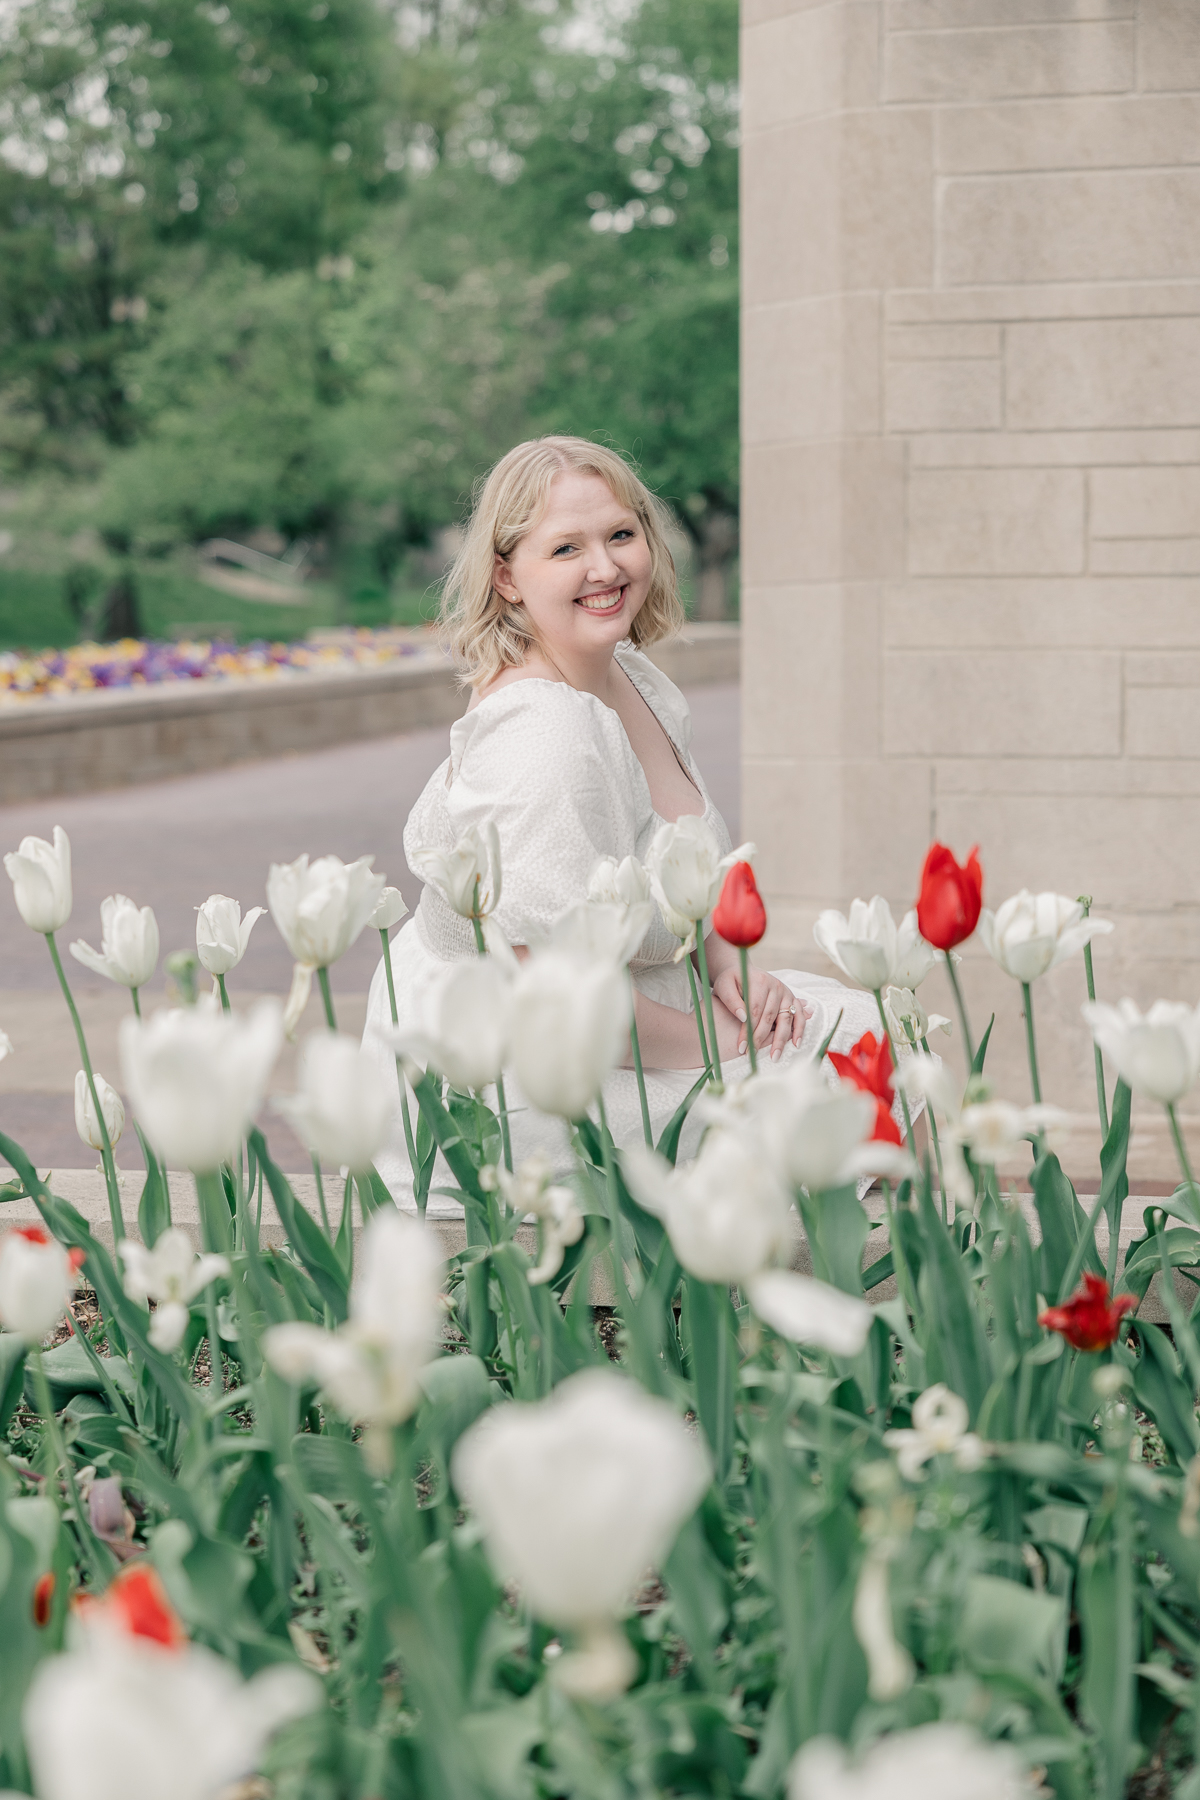 Senior photography session at IU Bloomington, woman in white dress sits by white and red tulip flowers